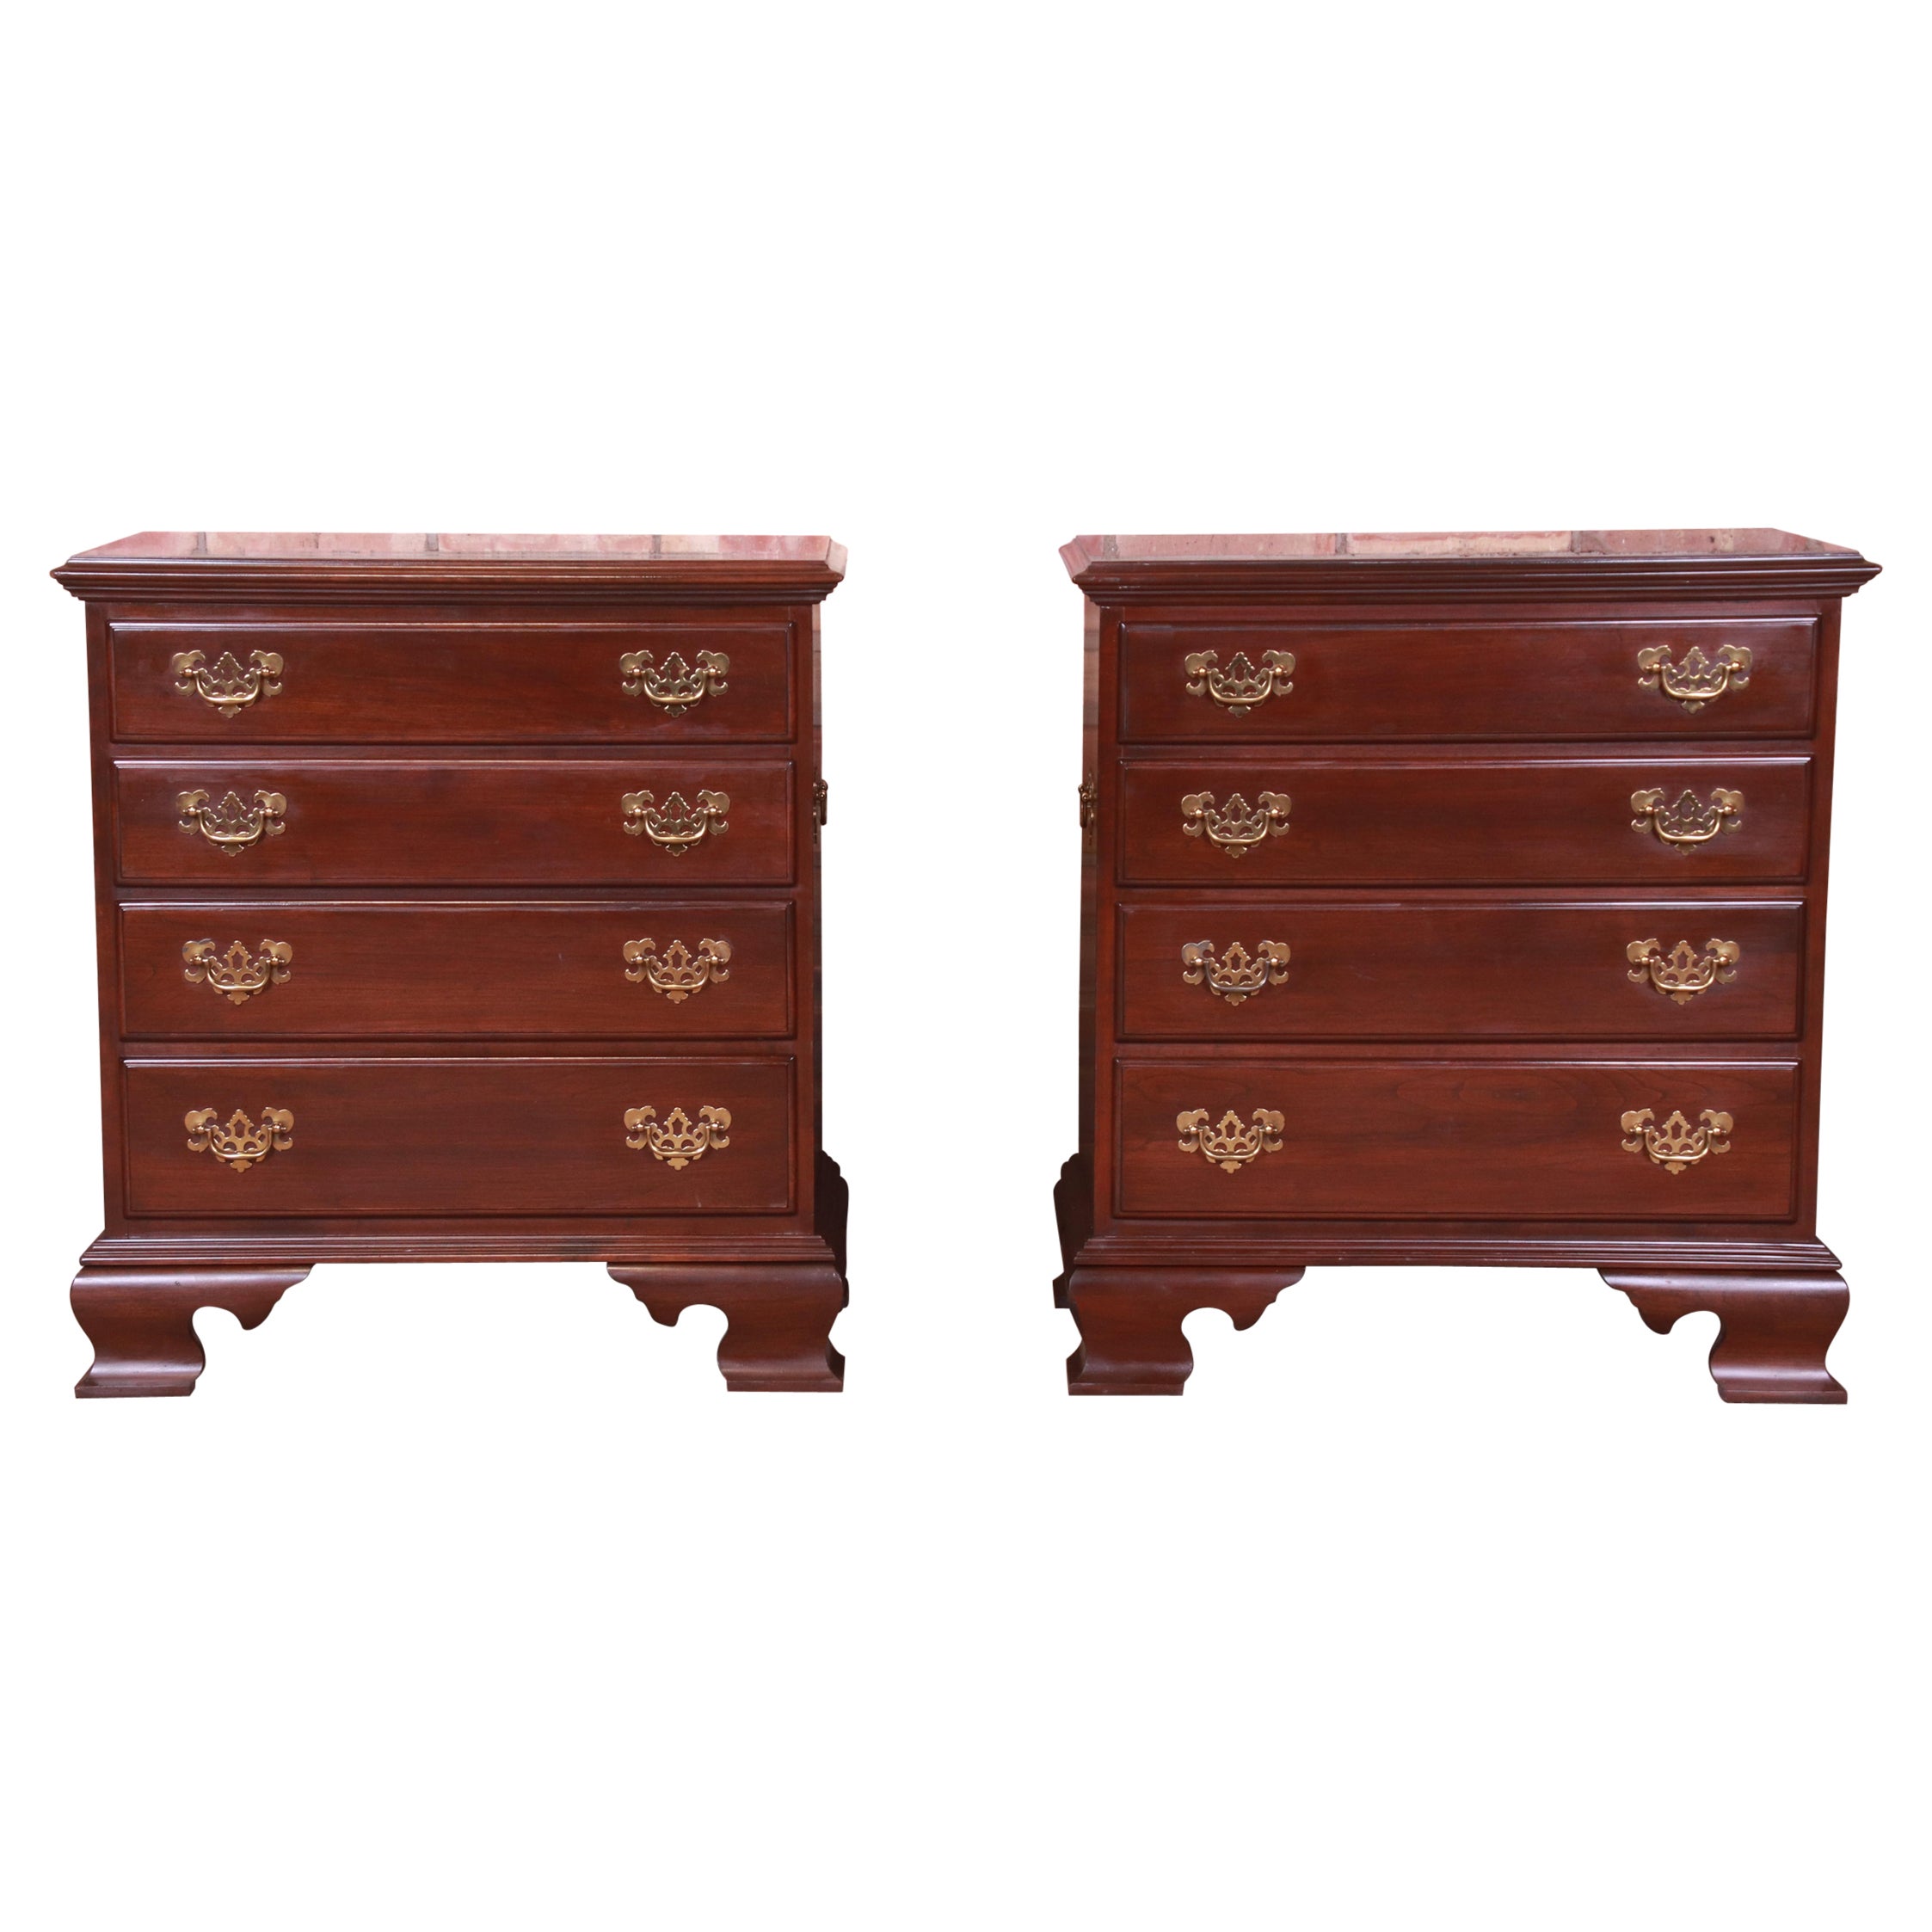 Ethan Allen Georgian Mahogany Four-Drawer Bedside Chests, Pair